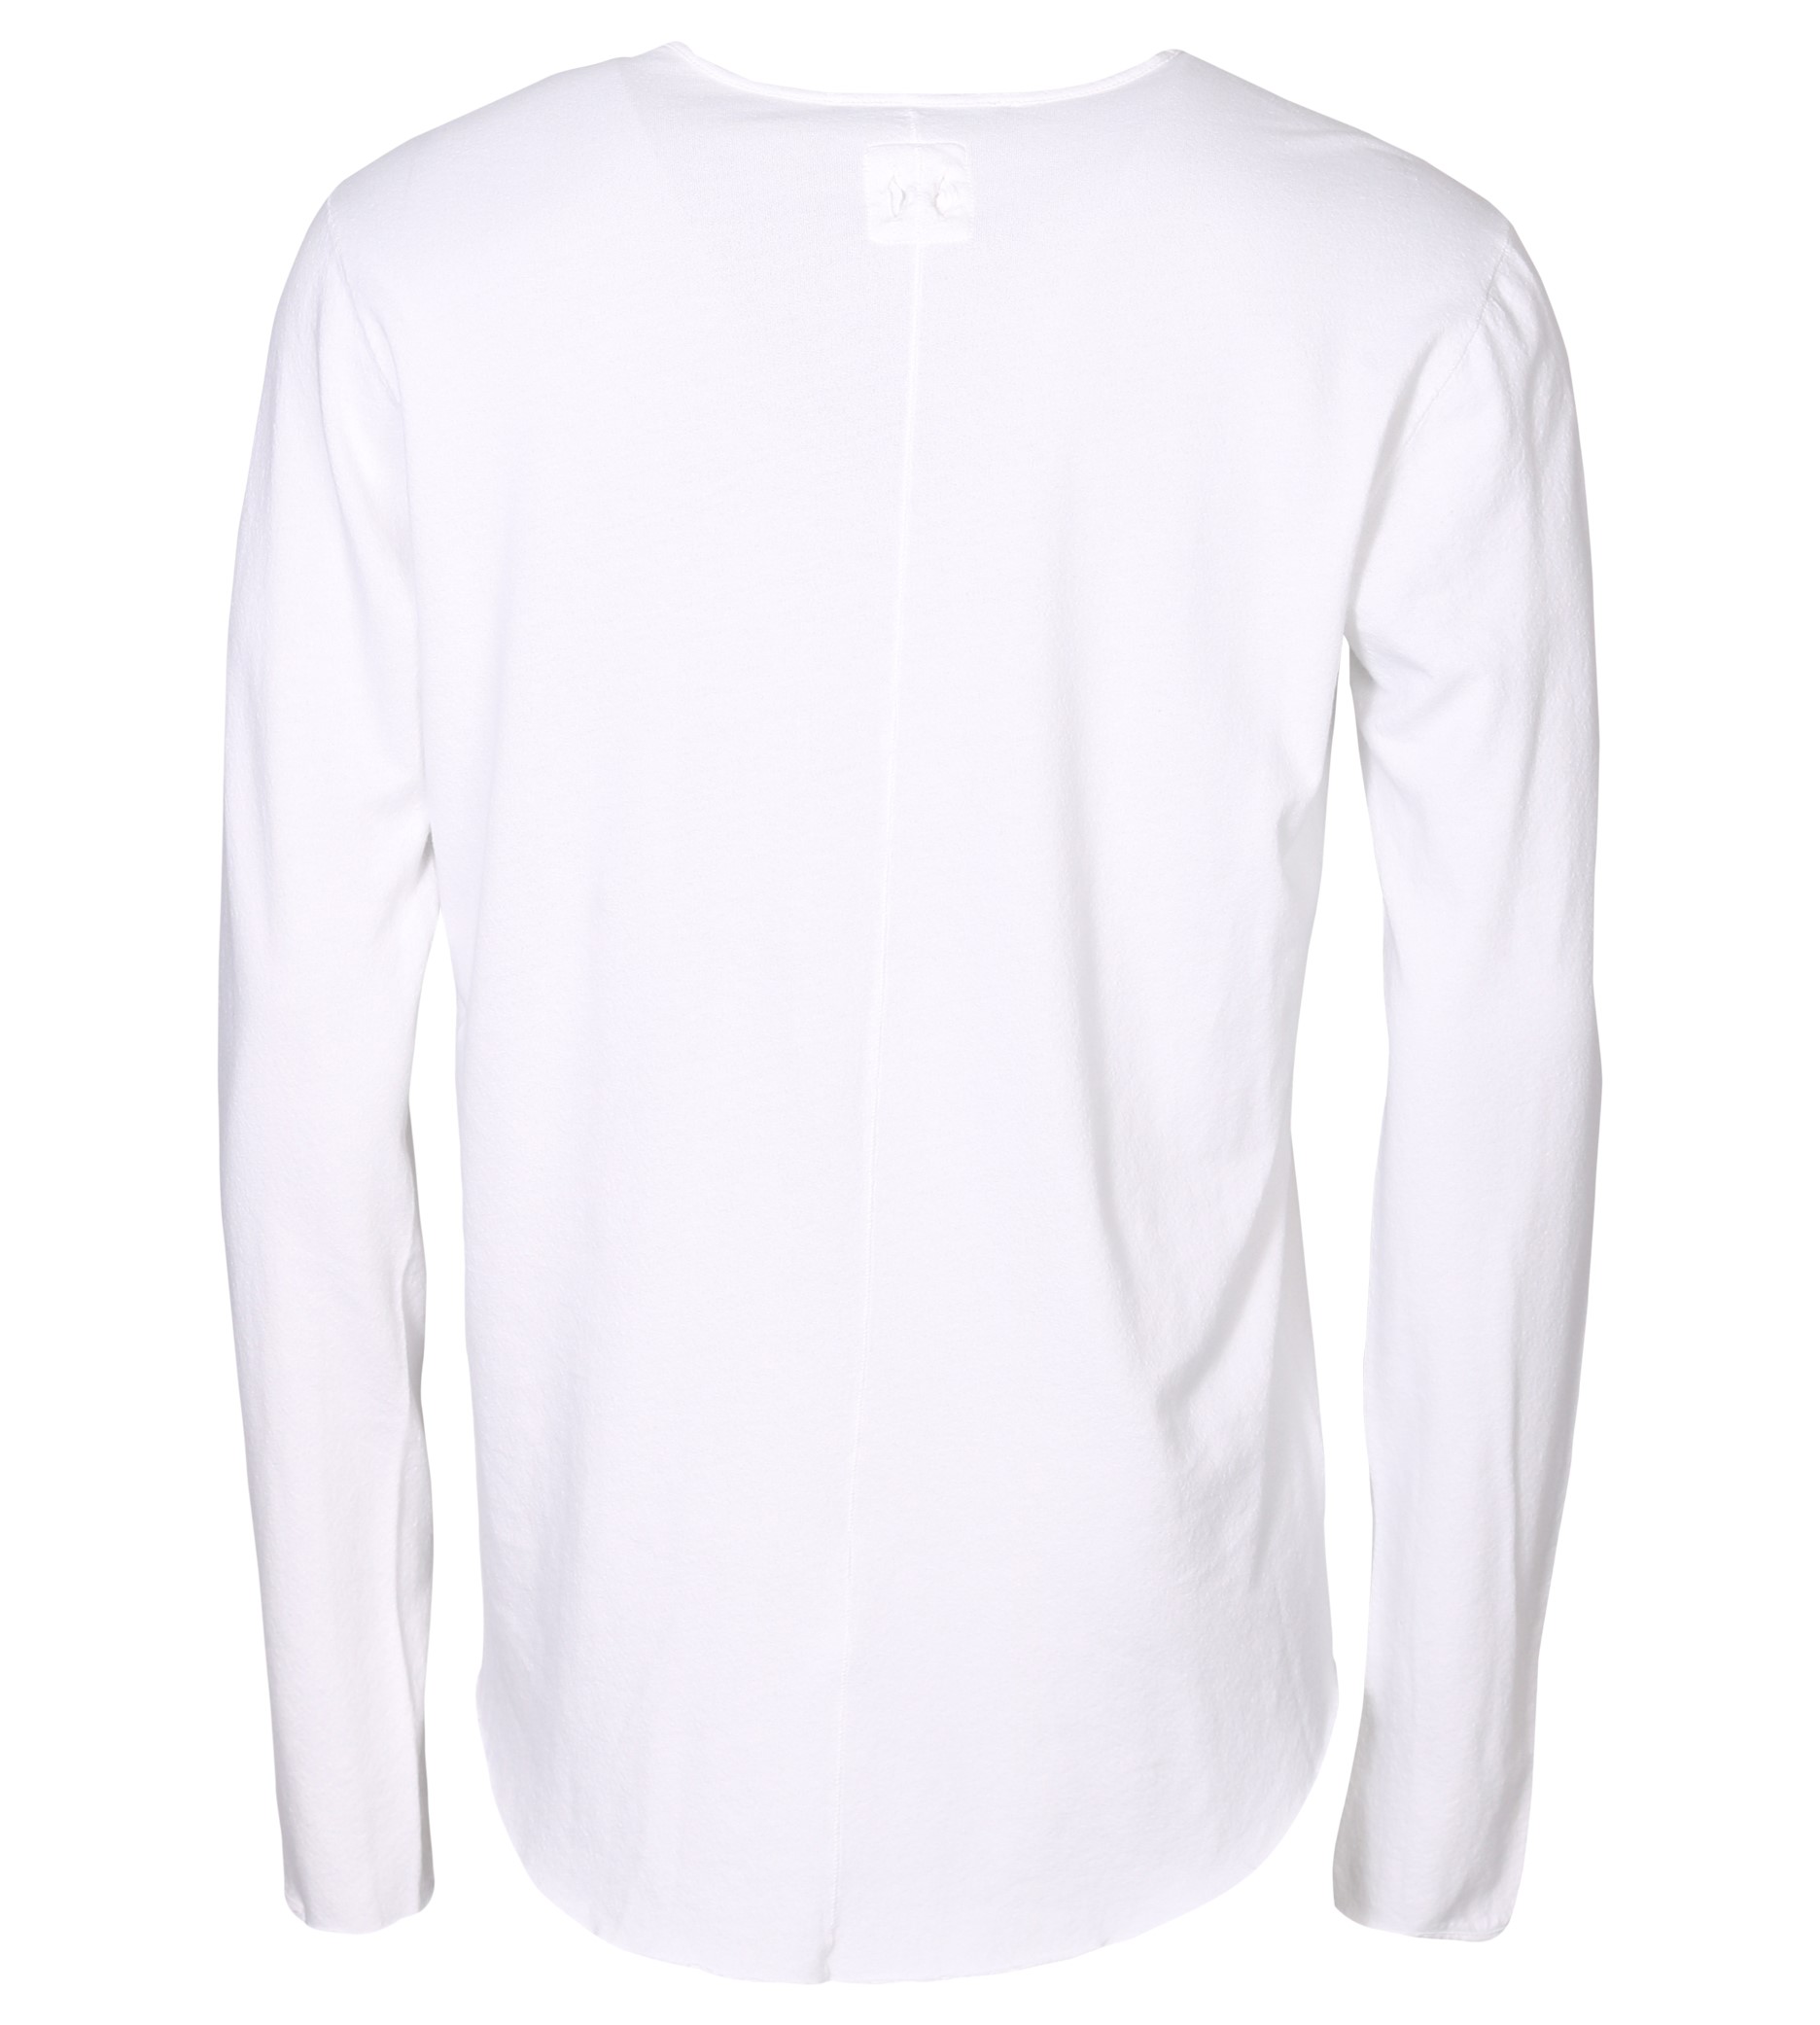 HANNES ROETHER Longsleeve in White L